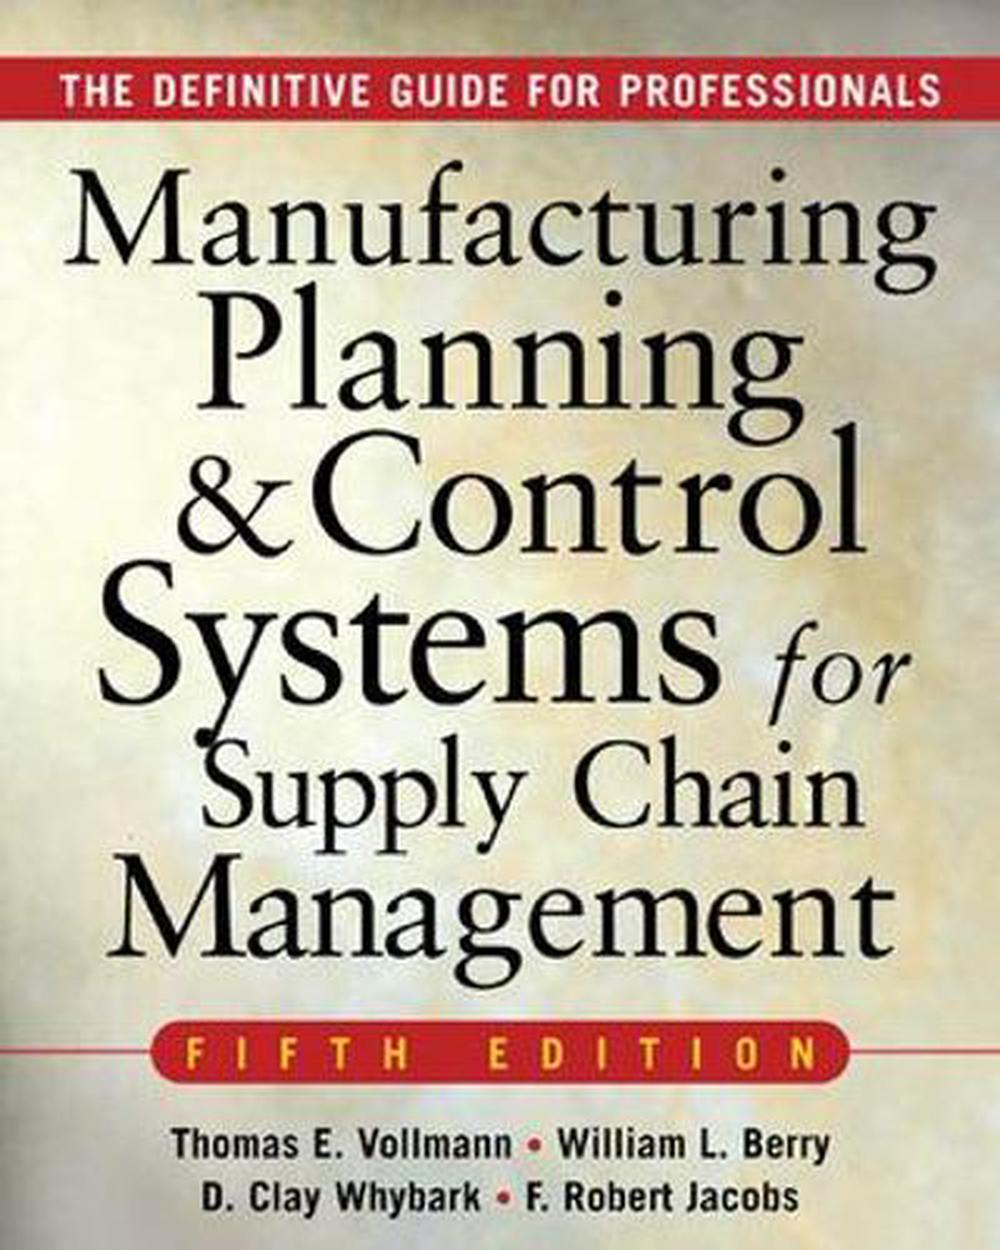 Manufacturing Planning and Control Systems for Supply Chain Management by Thomas E. Vollmann